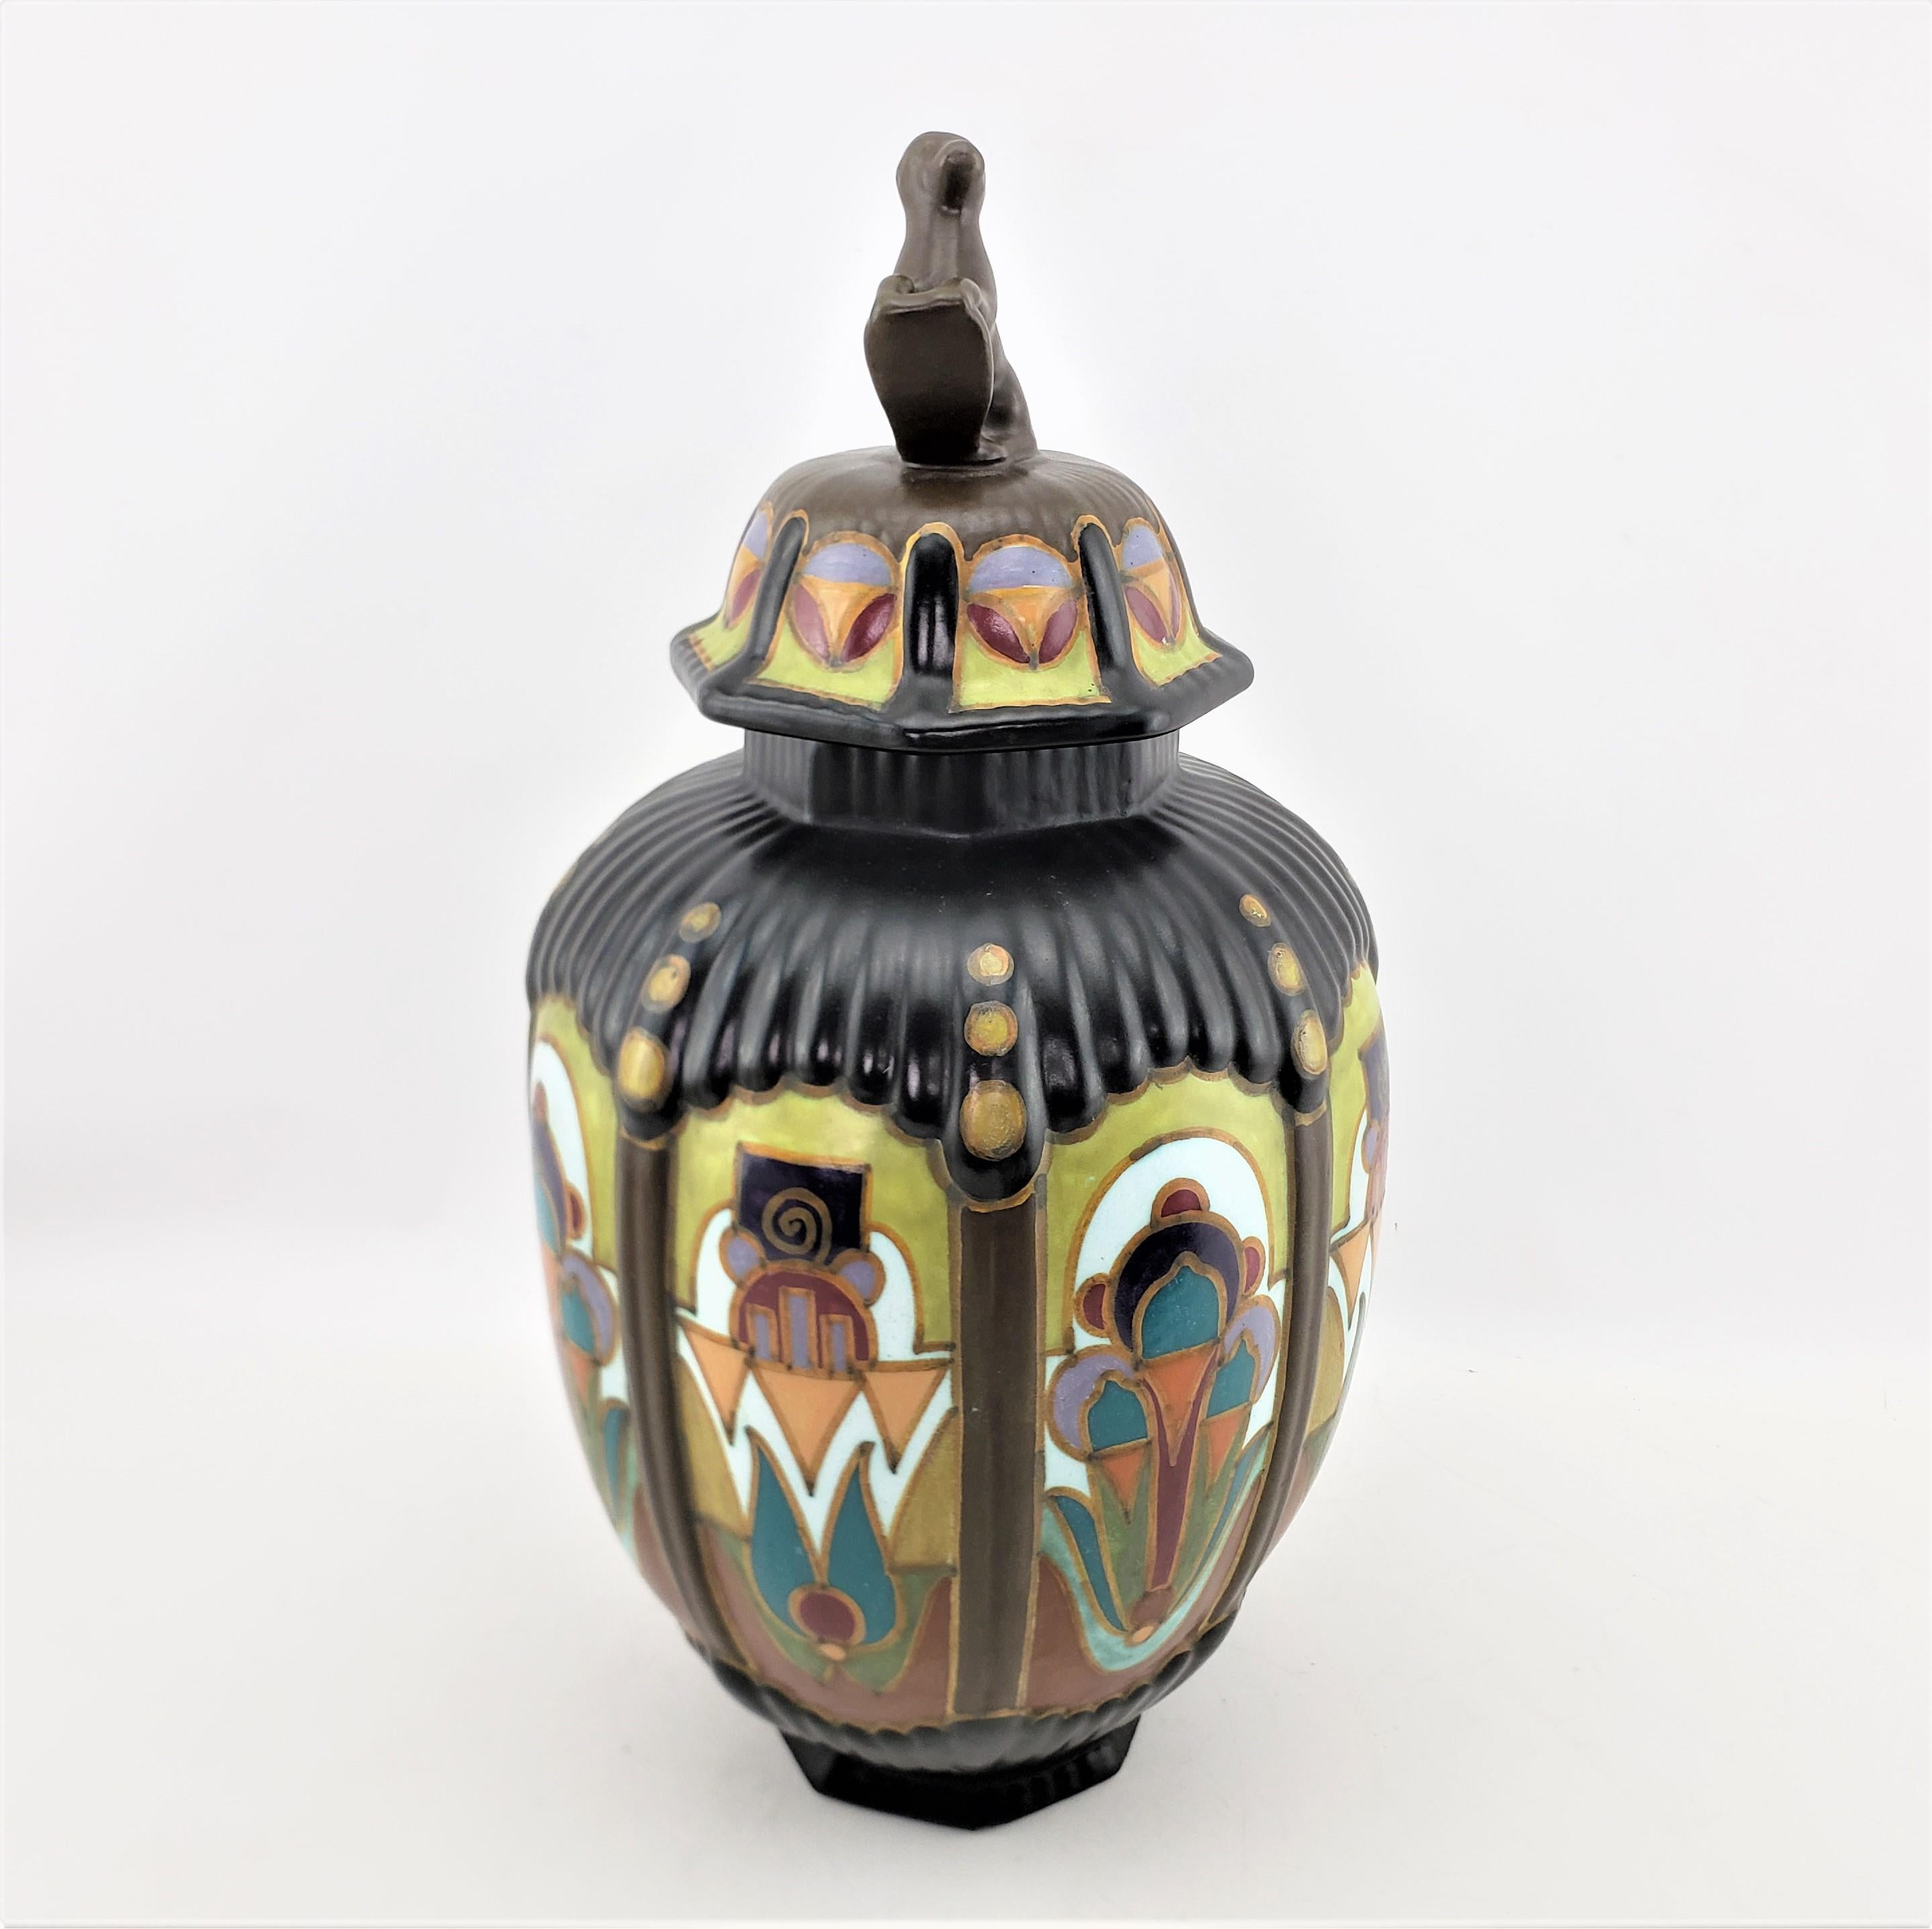 Large Antique Gouda Anhem Art Pottery Lidded Vase or Urn with Figural Handle In Good Condition For Sale In Hamilton, Ontario